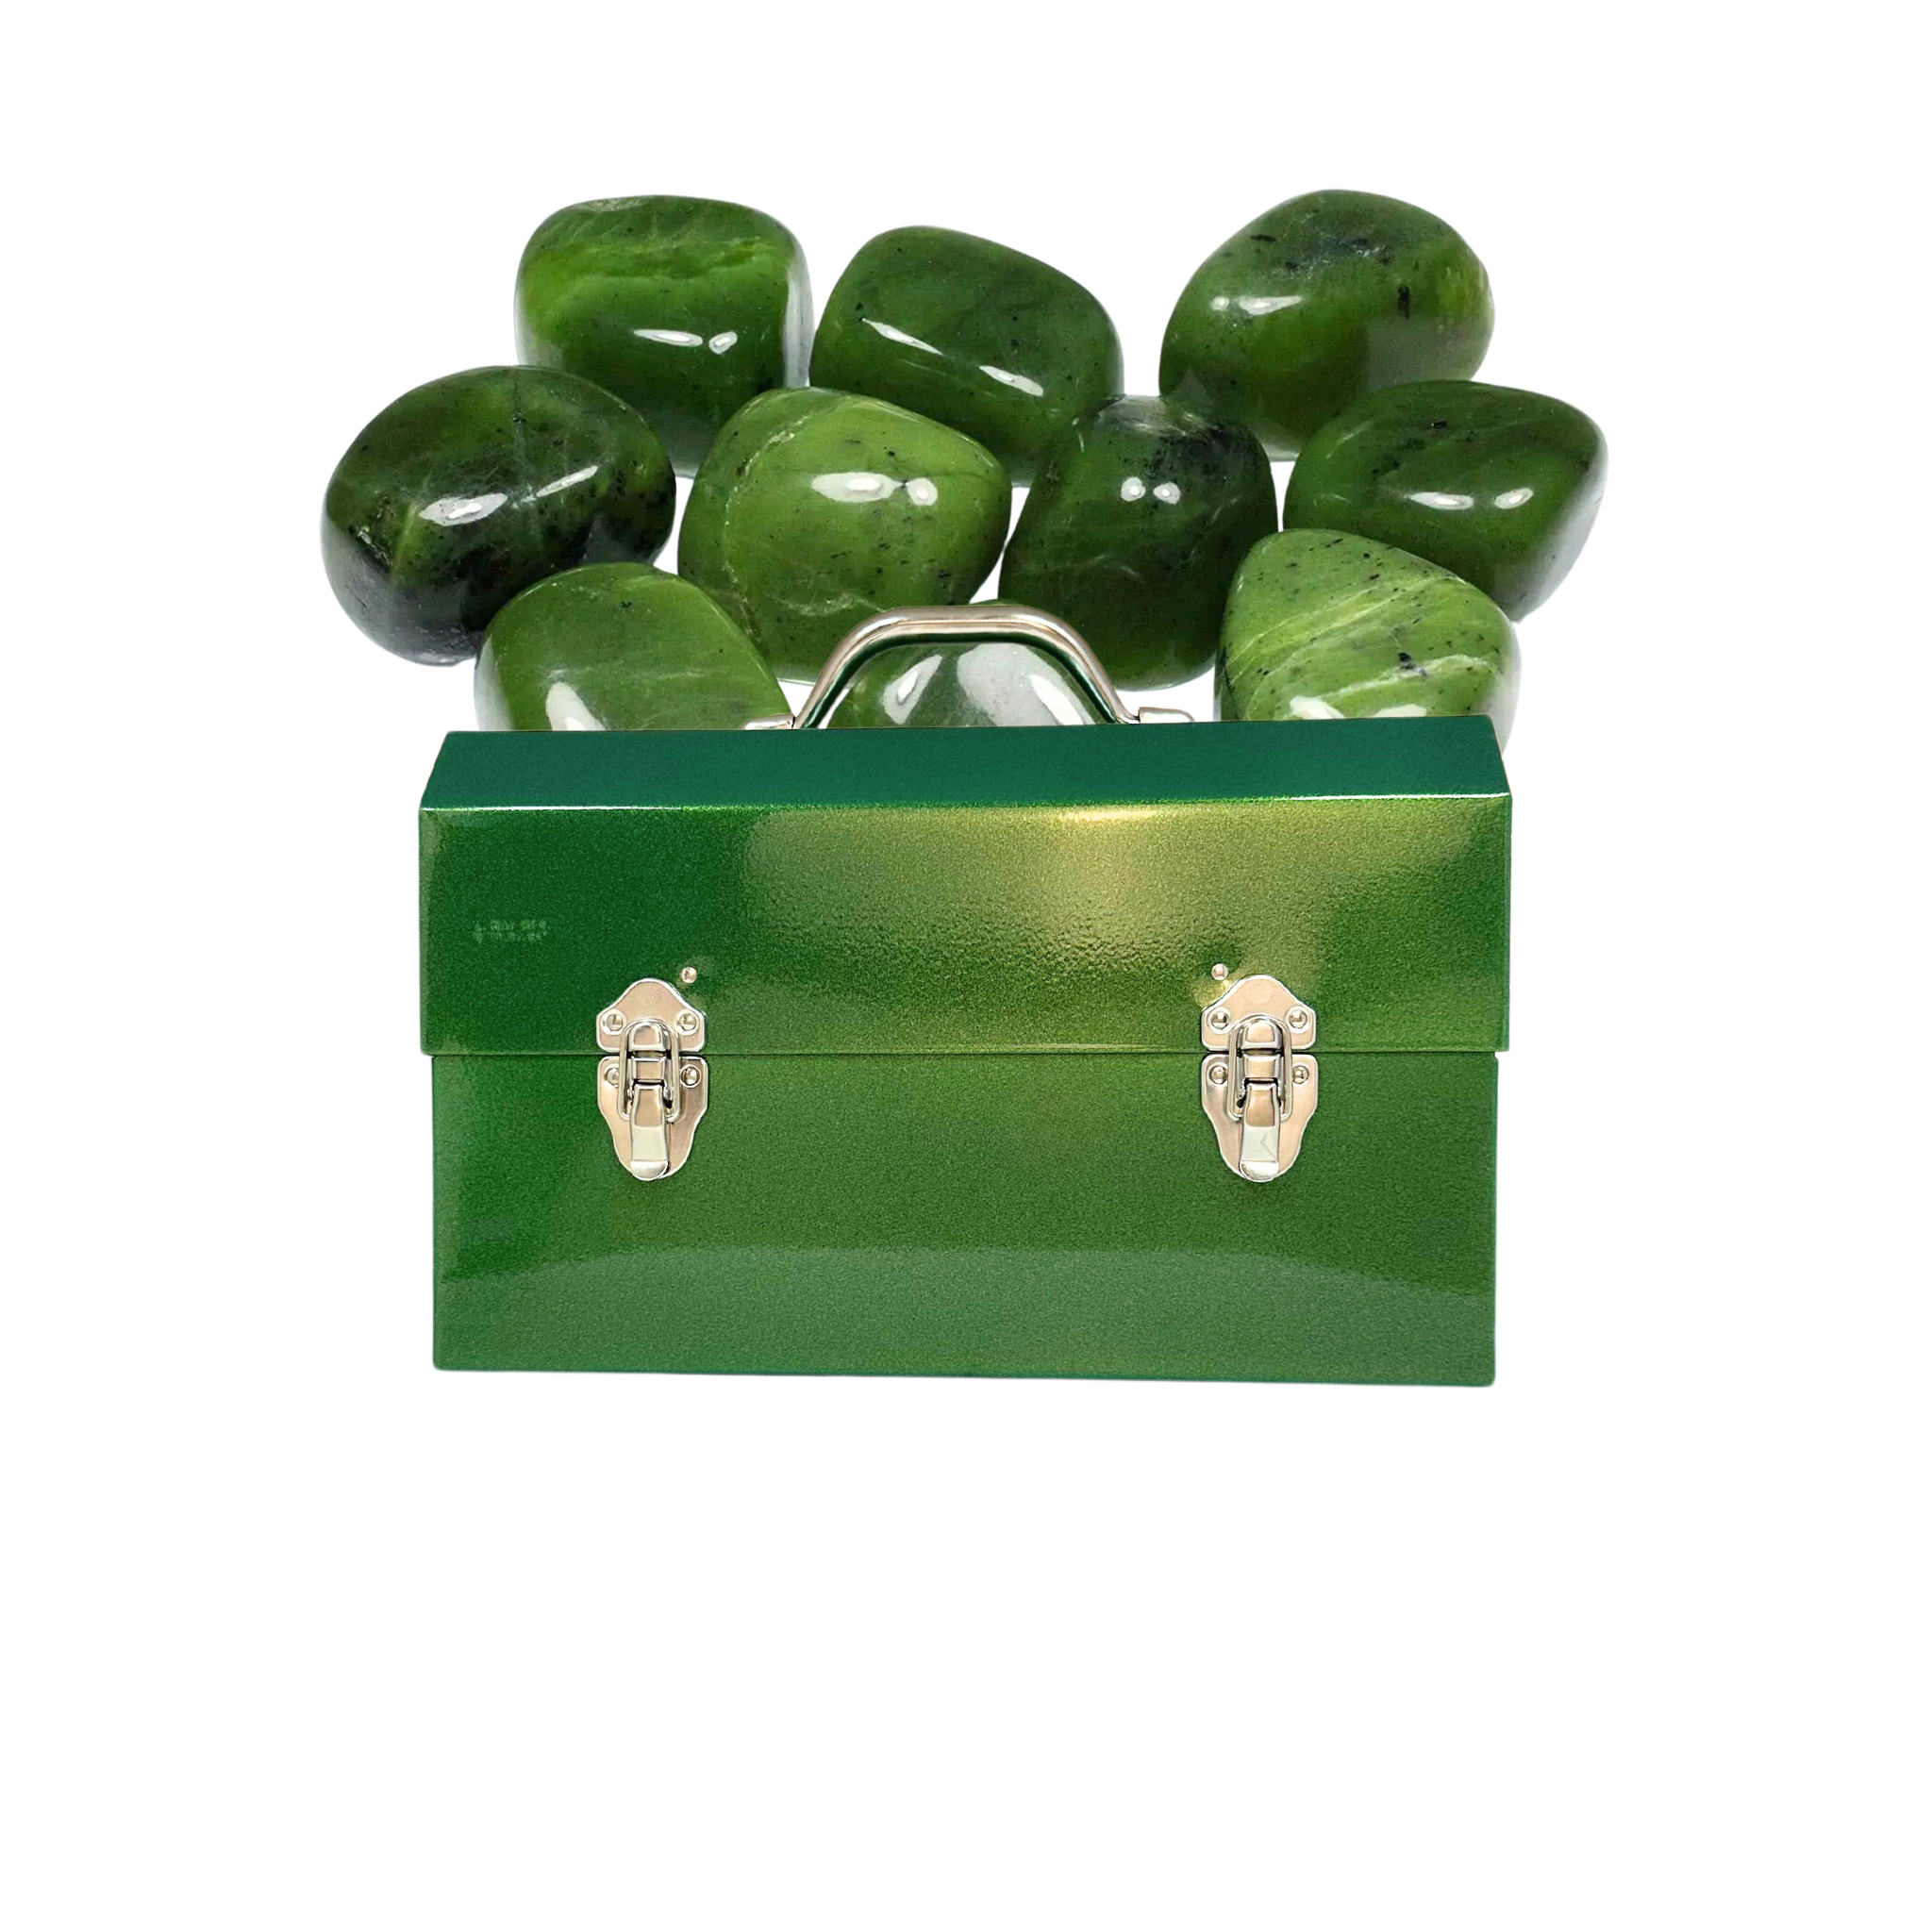 L. May aluminum lunchbox powder coated in green lemon lime for the gemstone jade collection